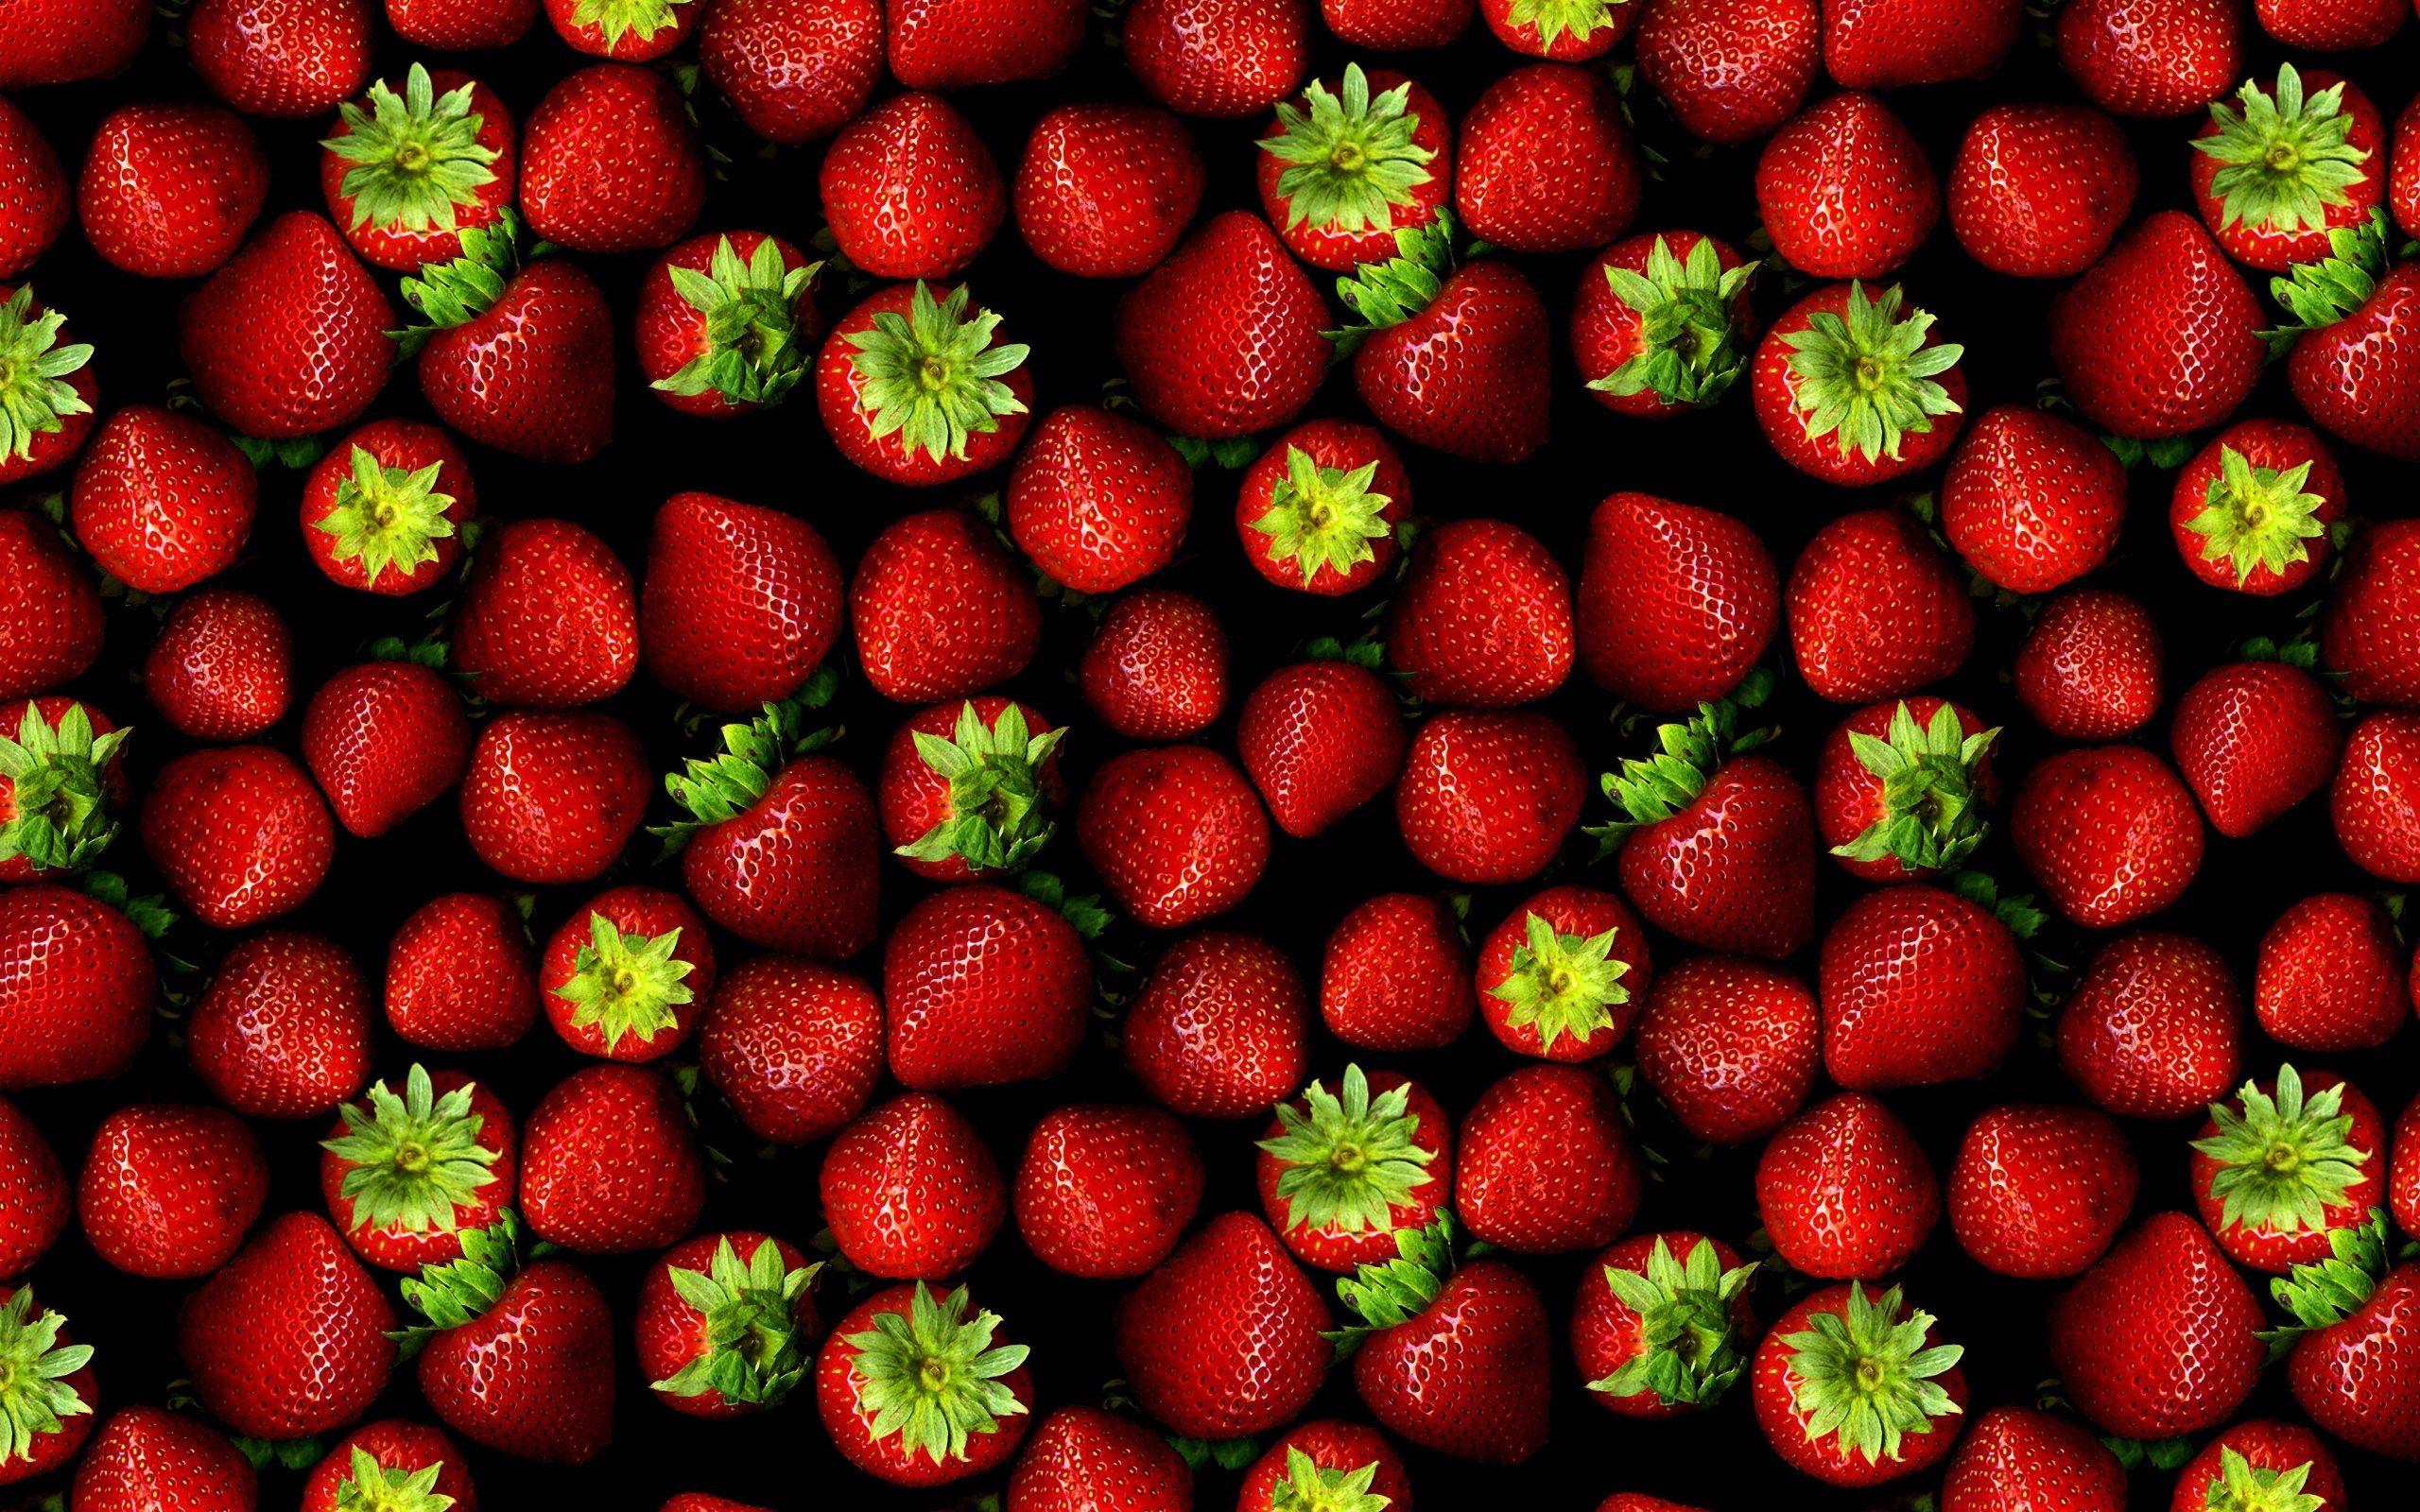 Buy 3D Strawberry 1854 Marina Zotova Wall Murals Wallpaper Mural Wall  Murals Removable Wallpaper, Non-Woven Paper Online | Kogan.com. 100%  Natural, Environmental and Breathable, safe for kids. No residue after  remove from